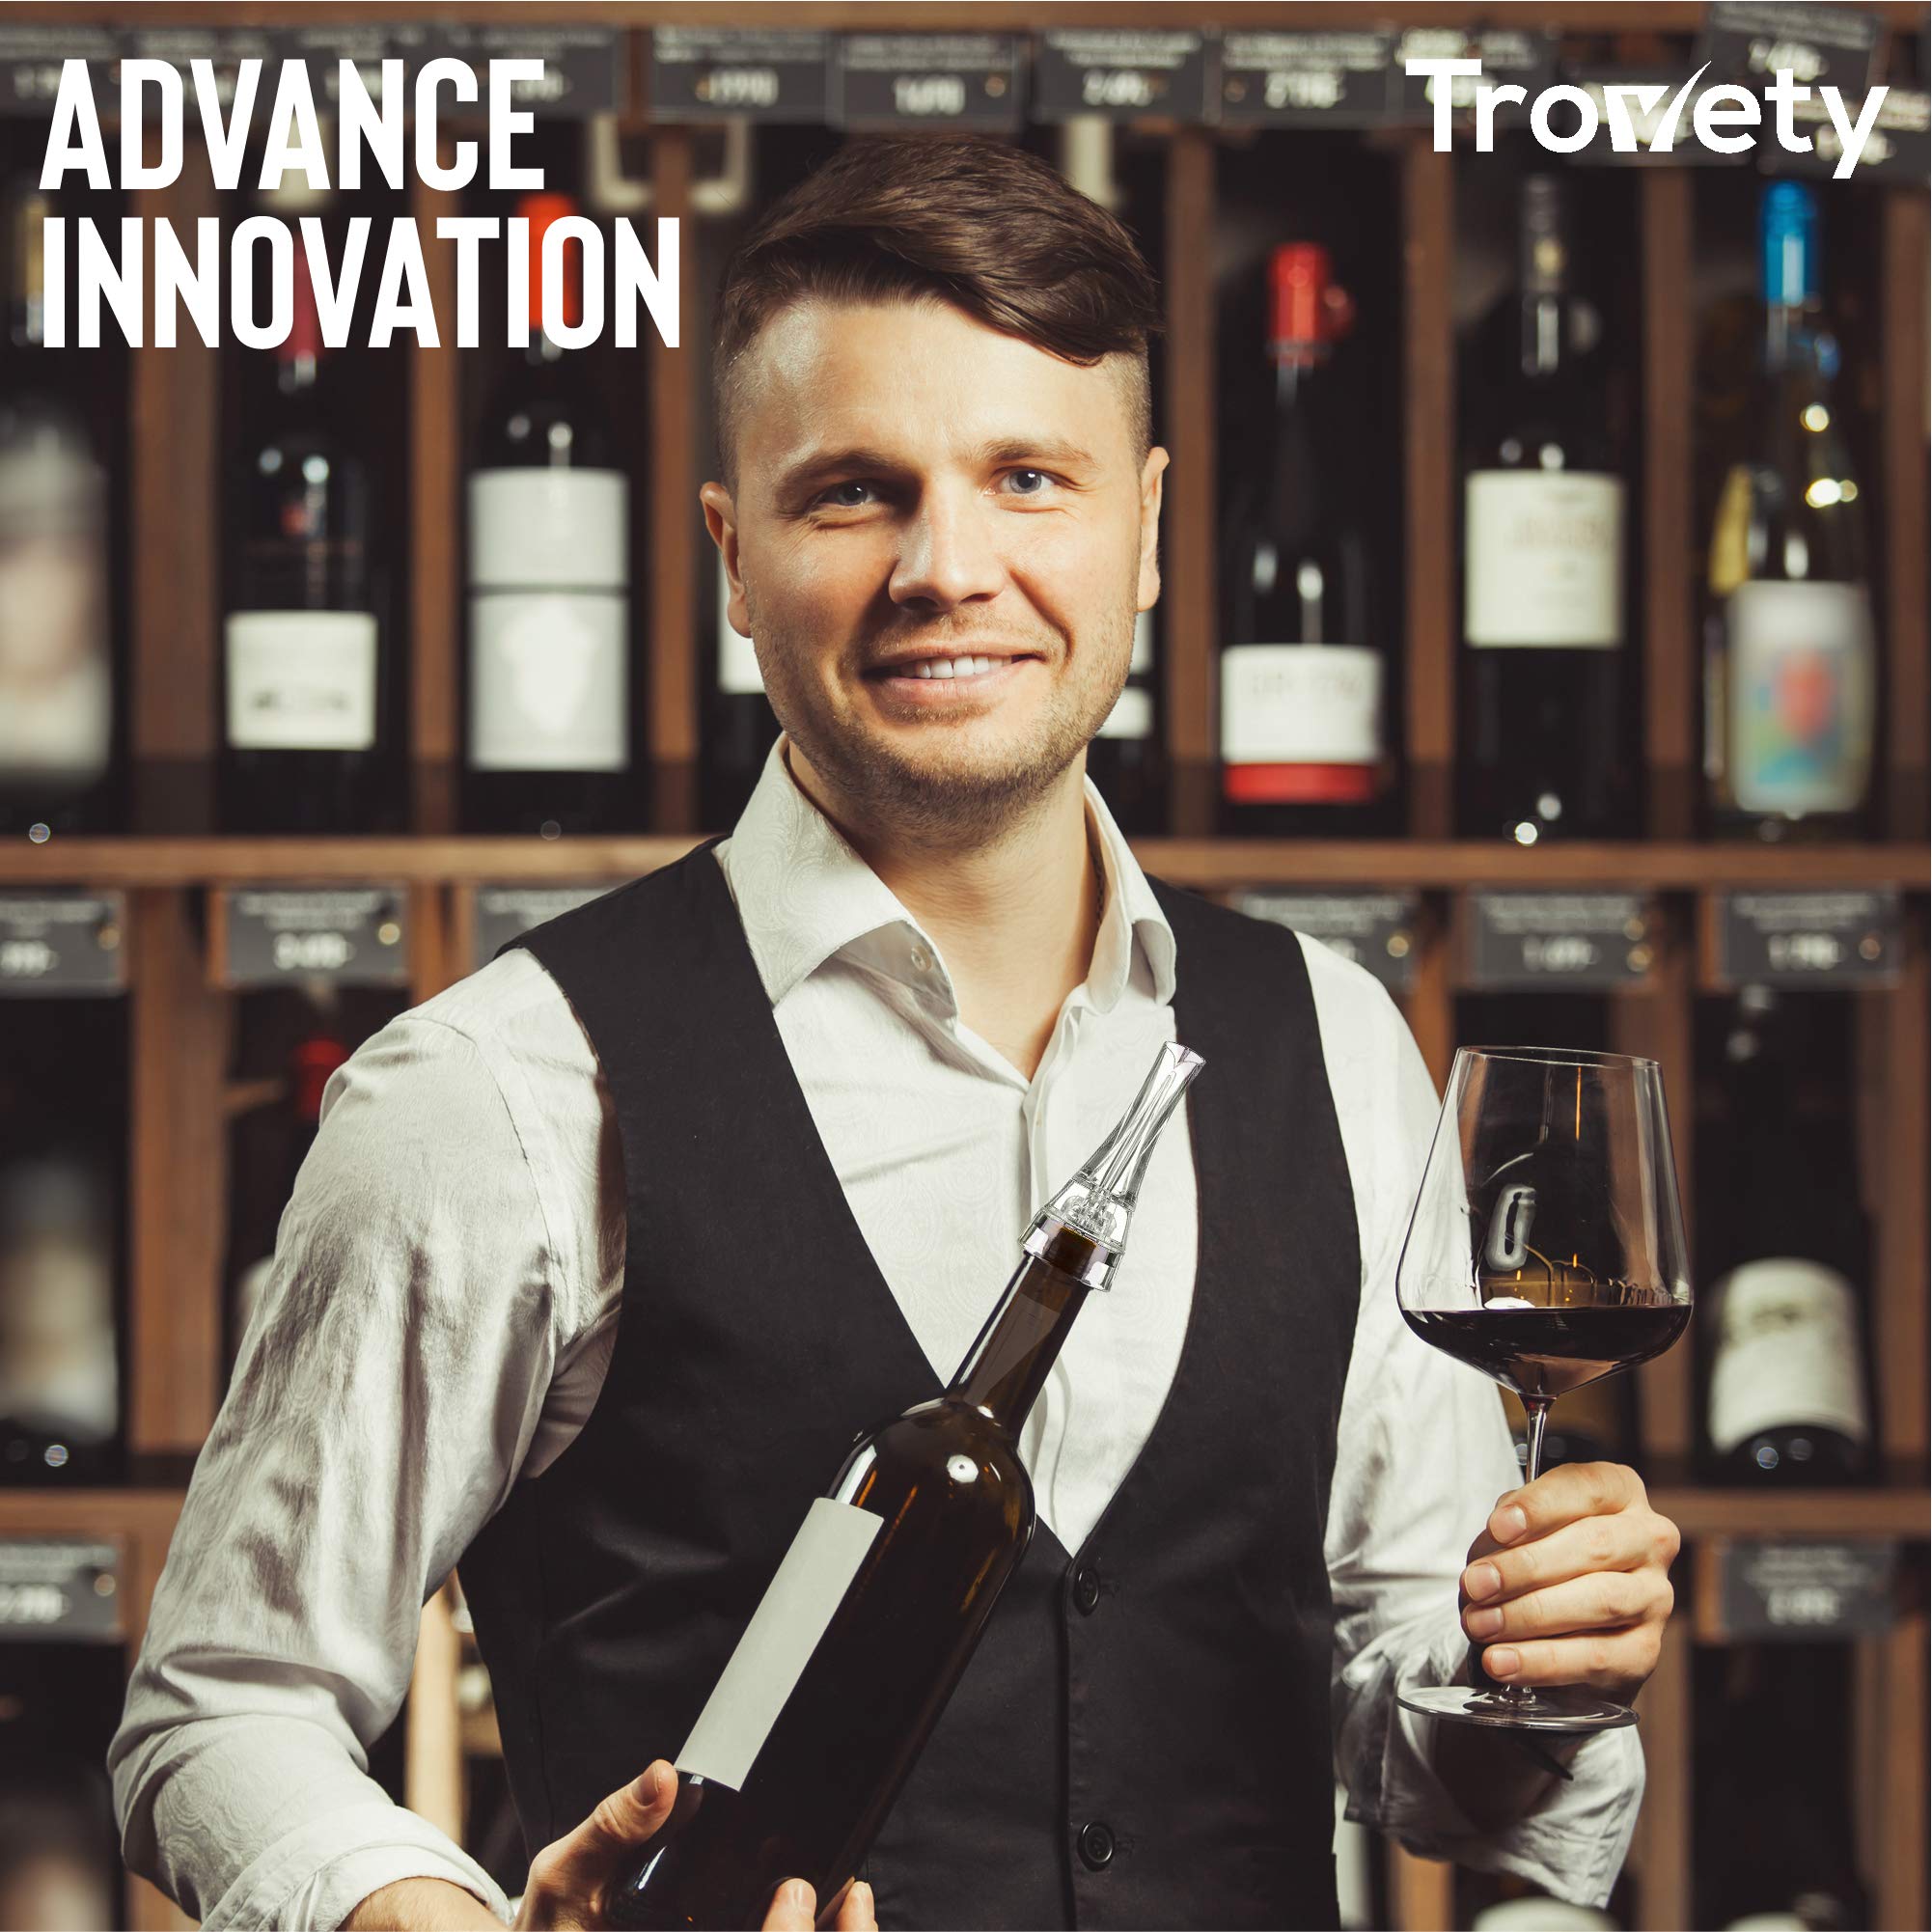 Trovety Aerators For Wine - Hawk-Bill Shape for Easy, No Drip Wine Aerator Pourer - Unique Built-In Aerator System for Fast Decanting - Can Fit Most Bottle Spout Sizes